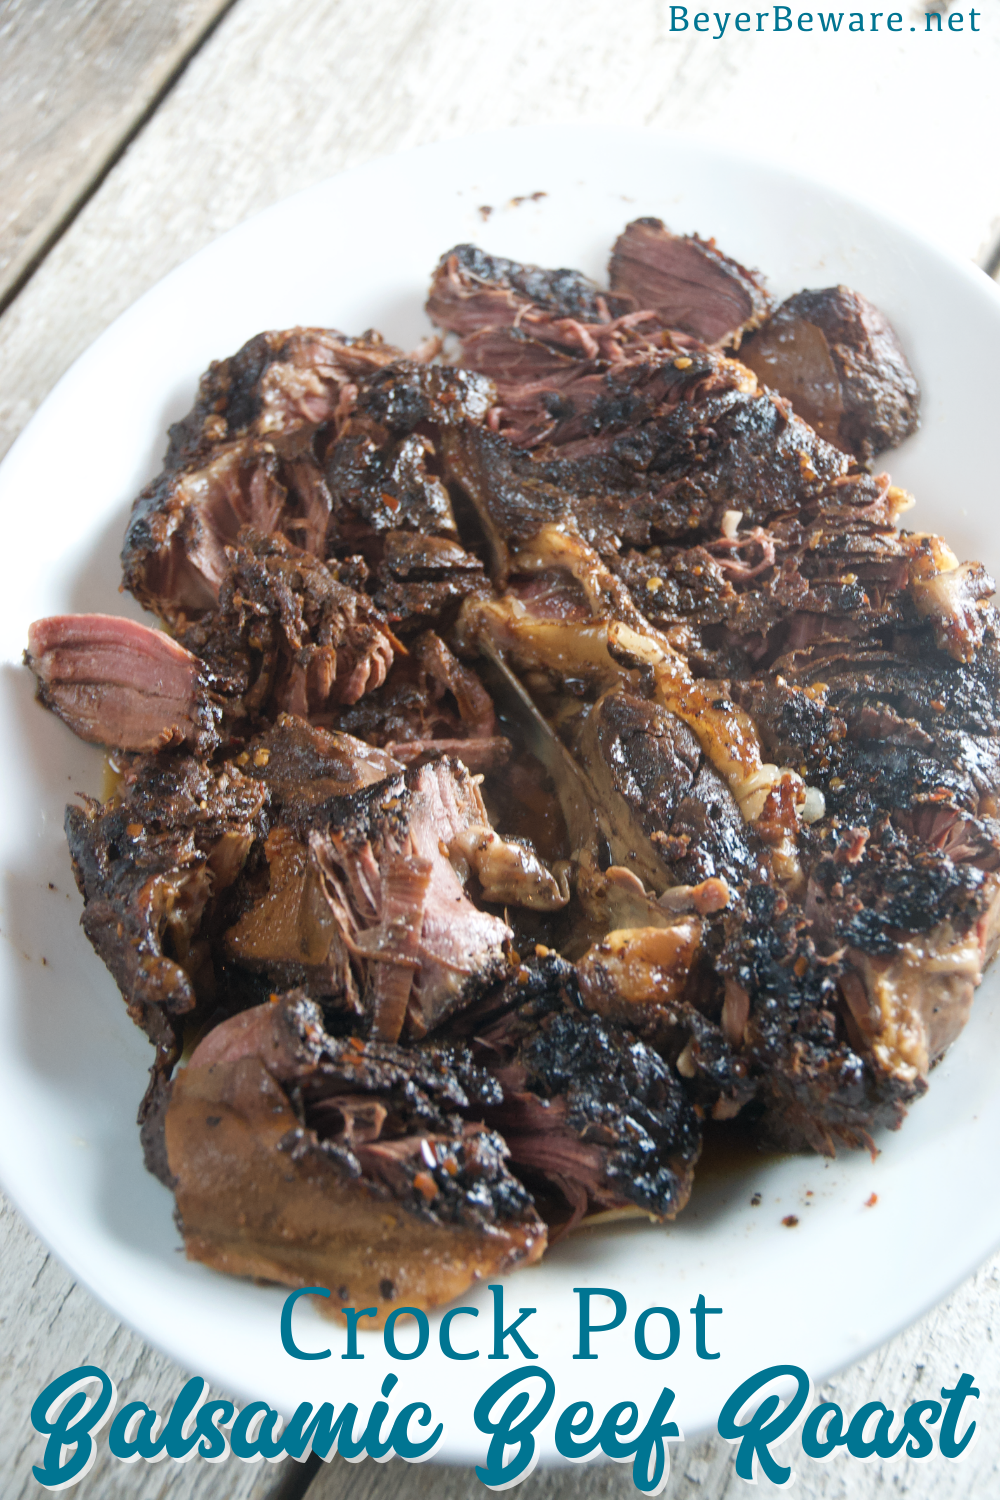 Crock Pot balsamic beef roast recipe combines balsamic vinegar with honey and red peppers over a beef roast for a tender and juicy slow cooker beef roast.